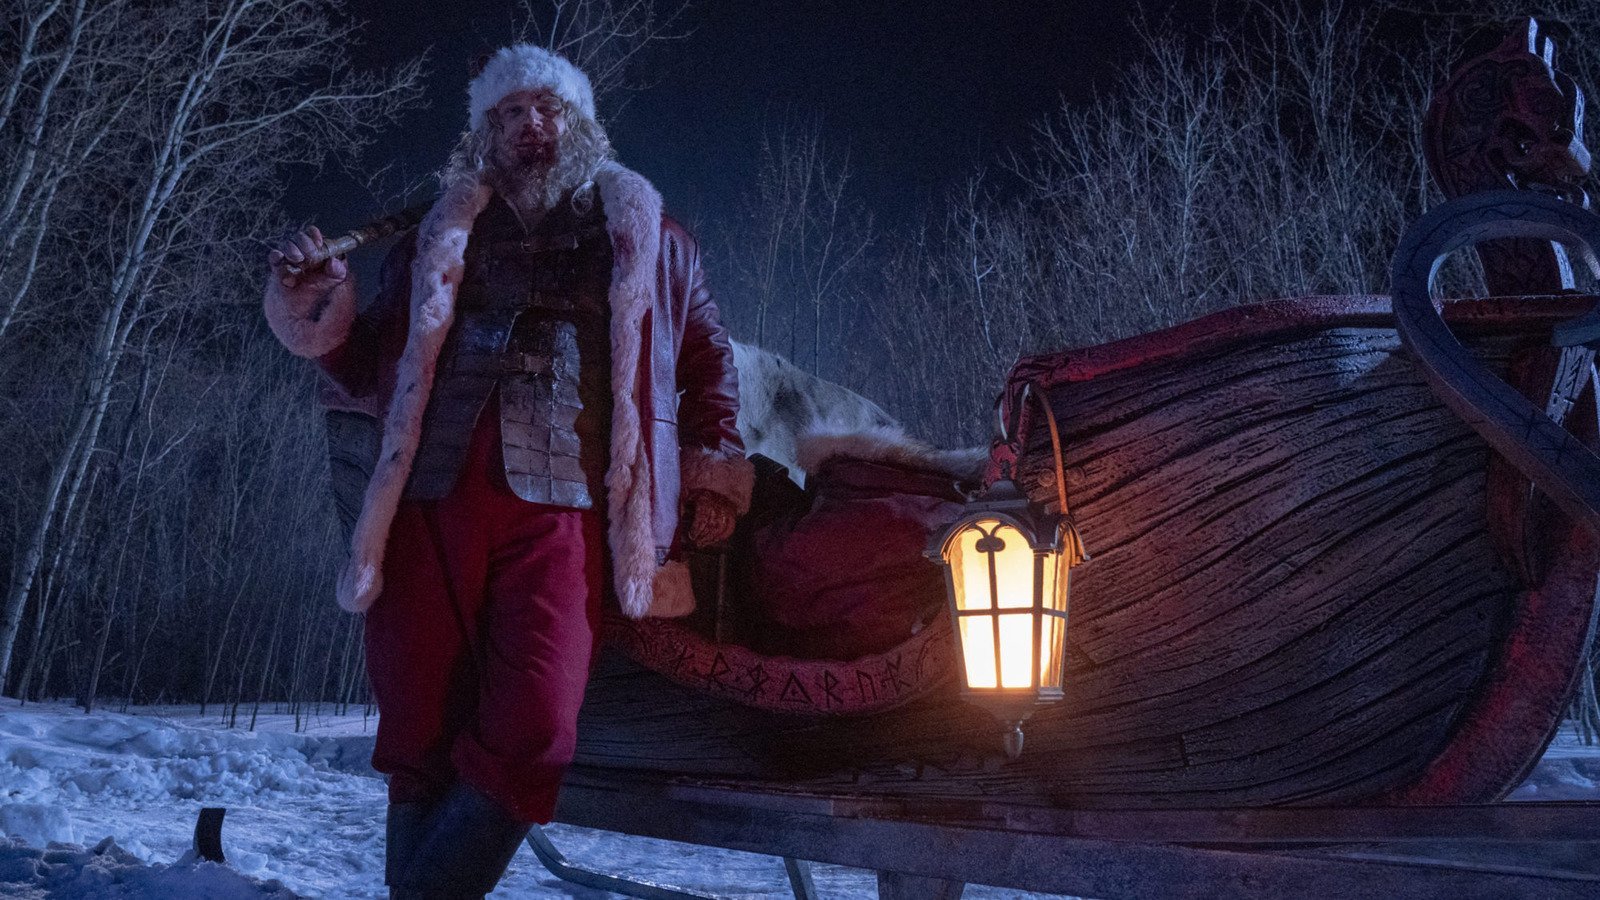 Violent Night Review: Santa Slays In This Soon-To-Be Christmas Classic